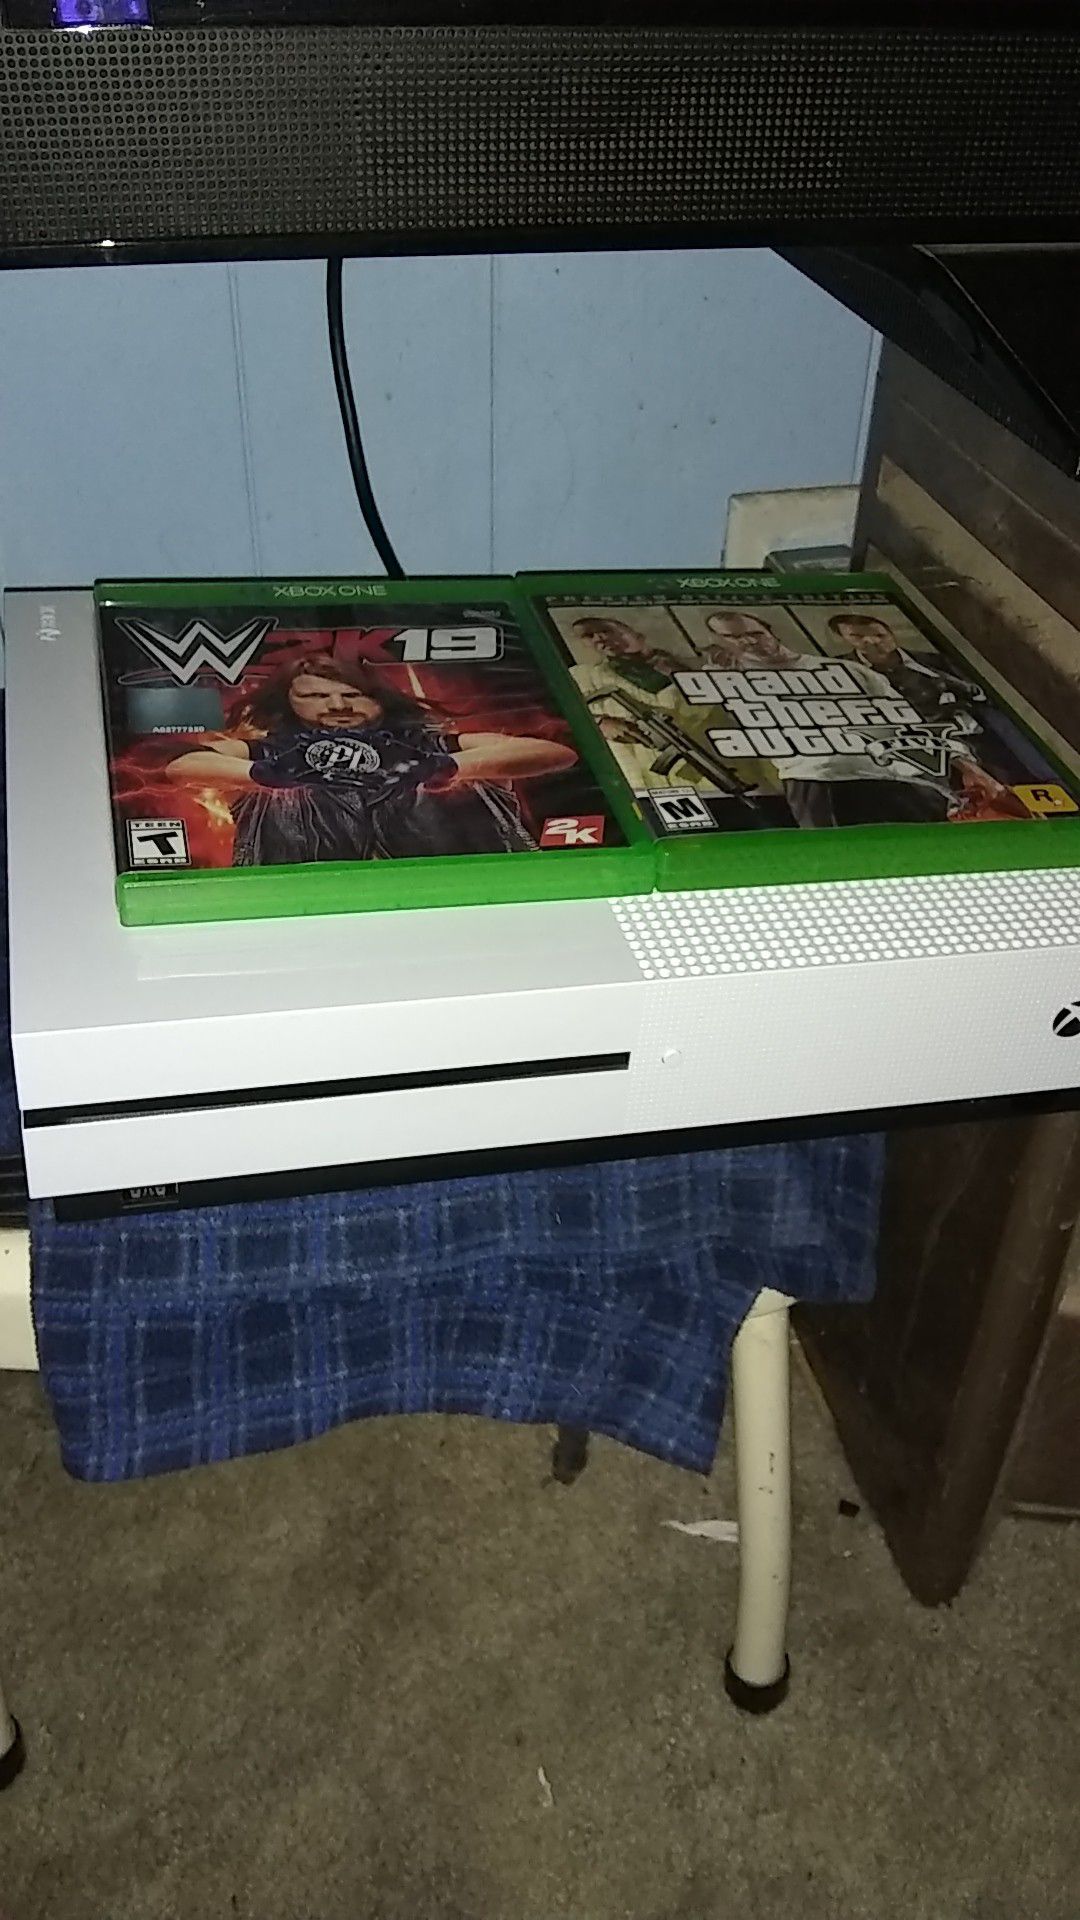 1tb Xbox one s w/controller and 2 games also comes with box too need cash up front